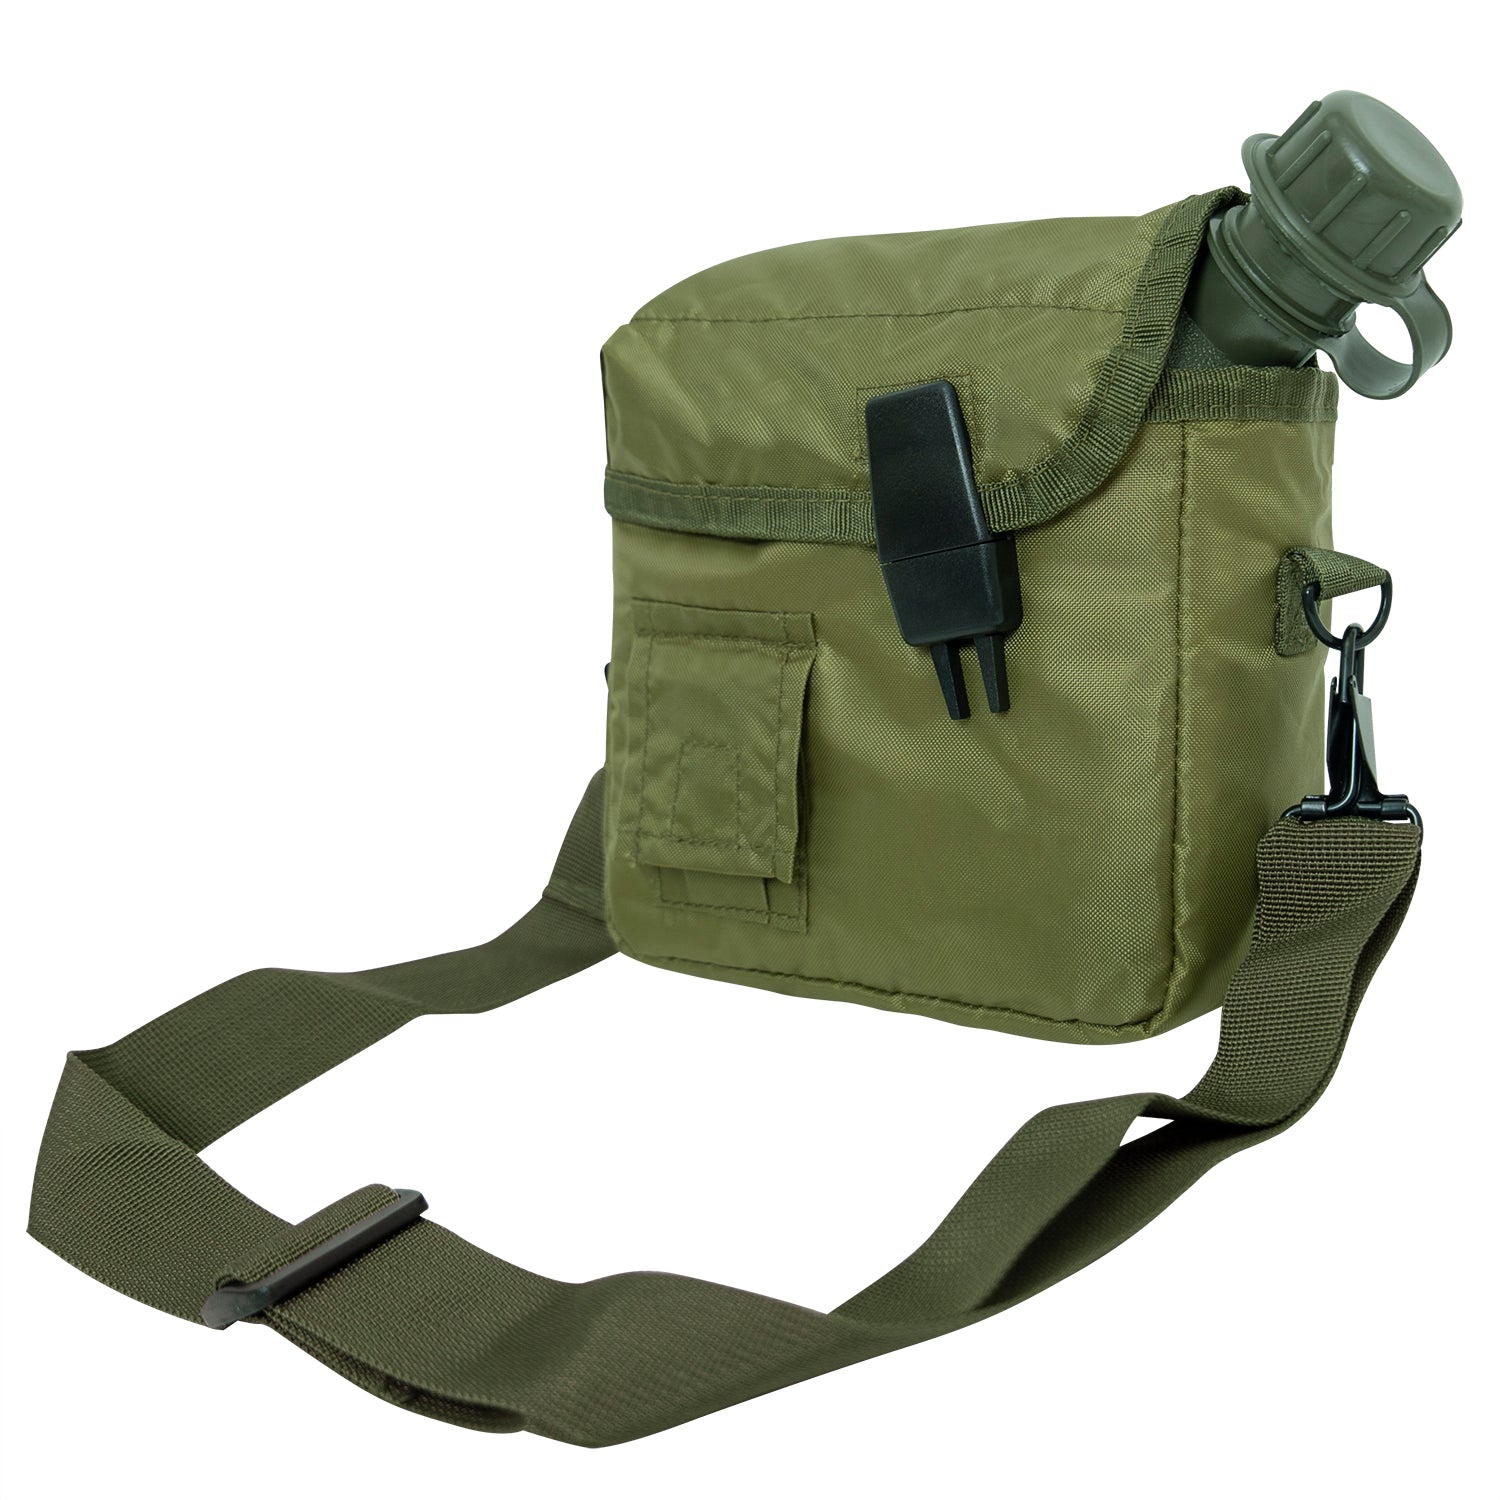 2 Quart Canteen Cover with Strap – Troops Military Supply